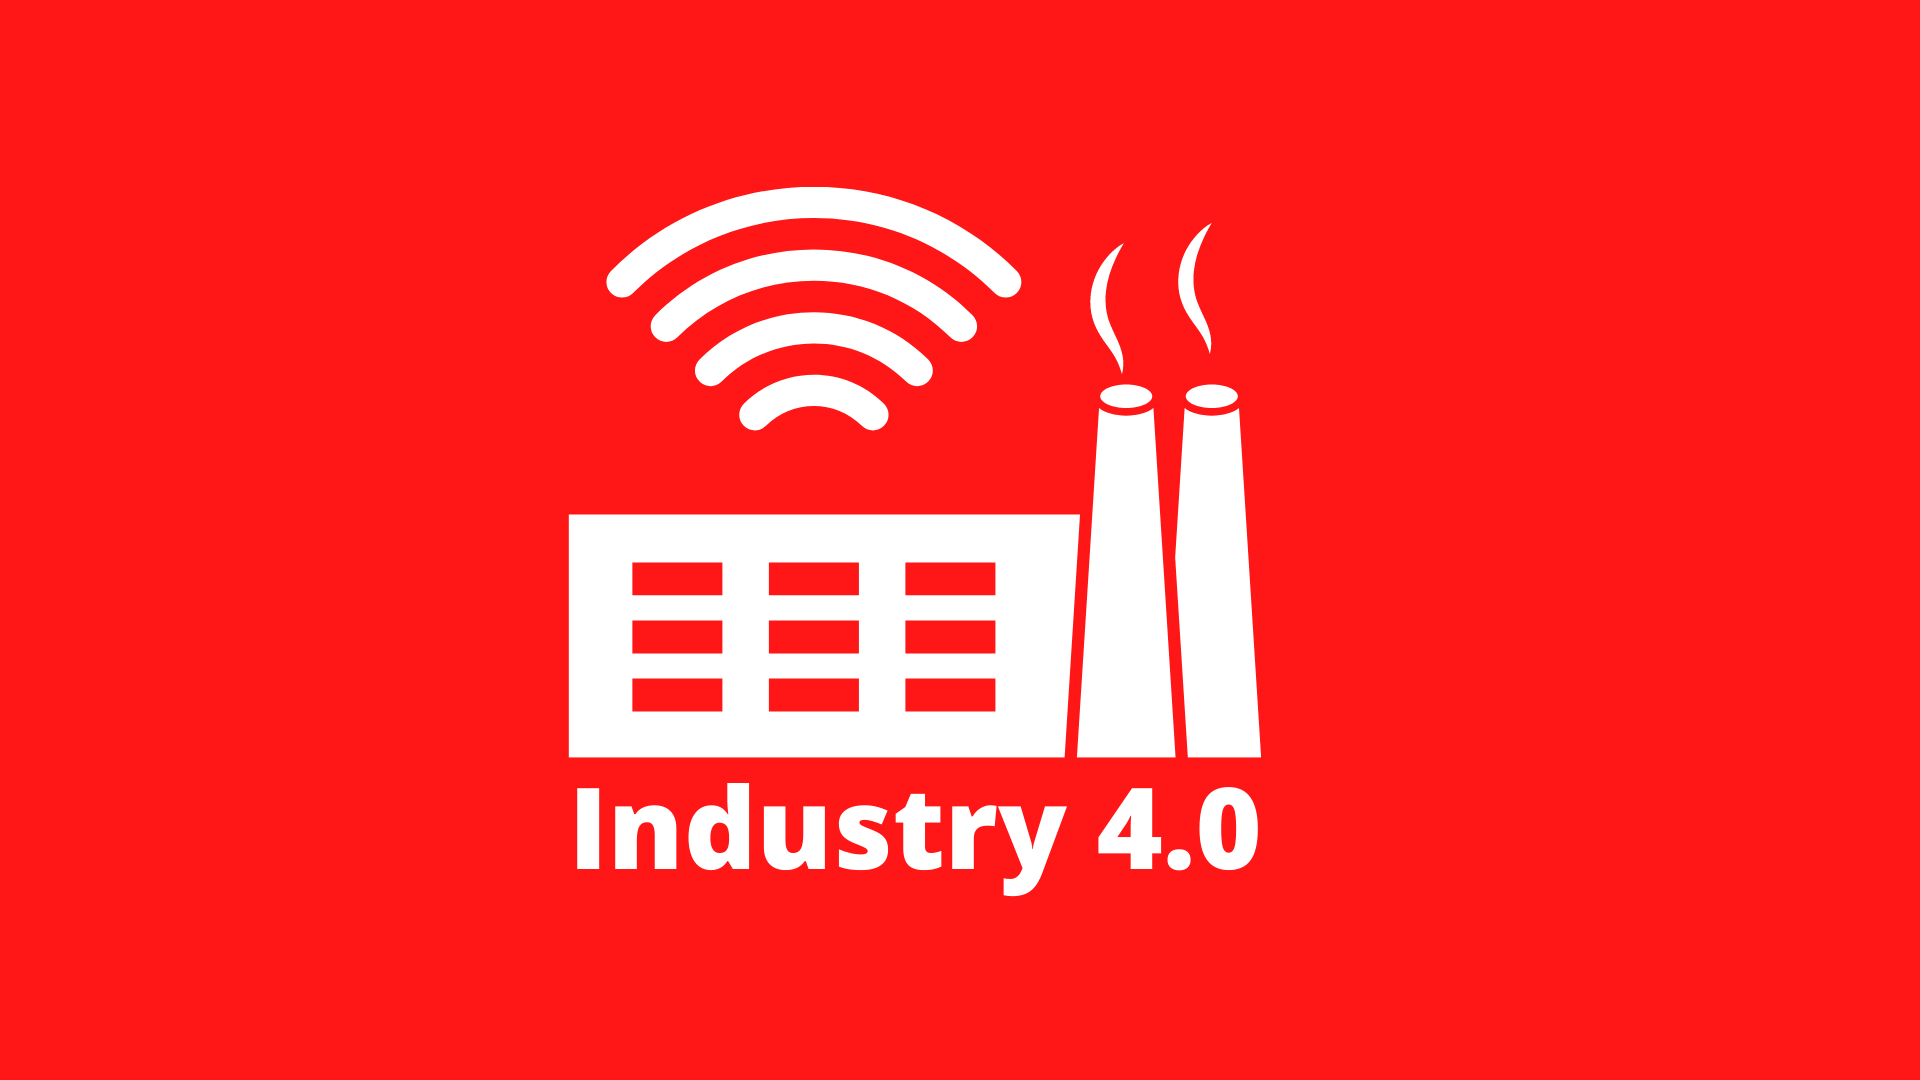 Industry 4.0 in the Simplest Terms Possible